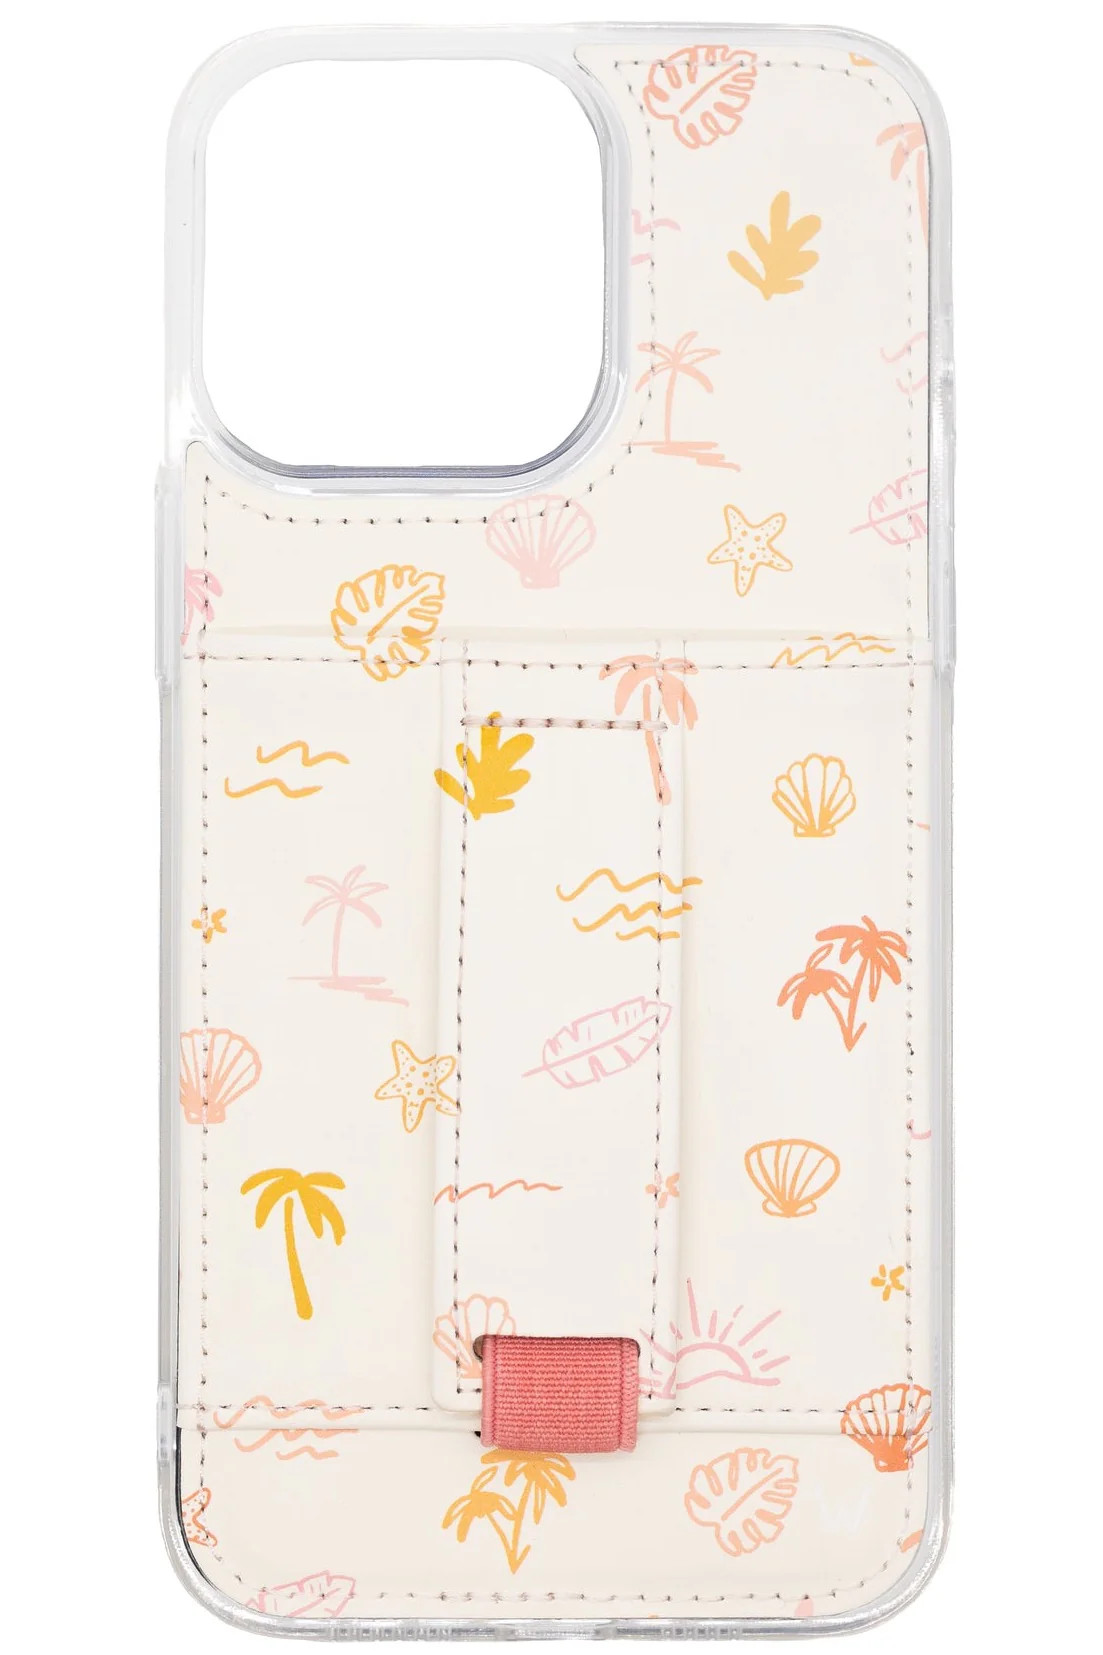 Salty Days by Brit Kent | Walli Cases